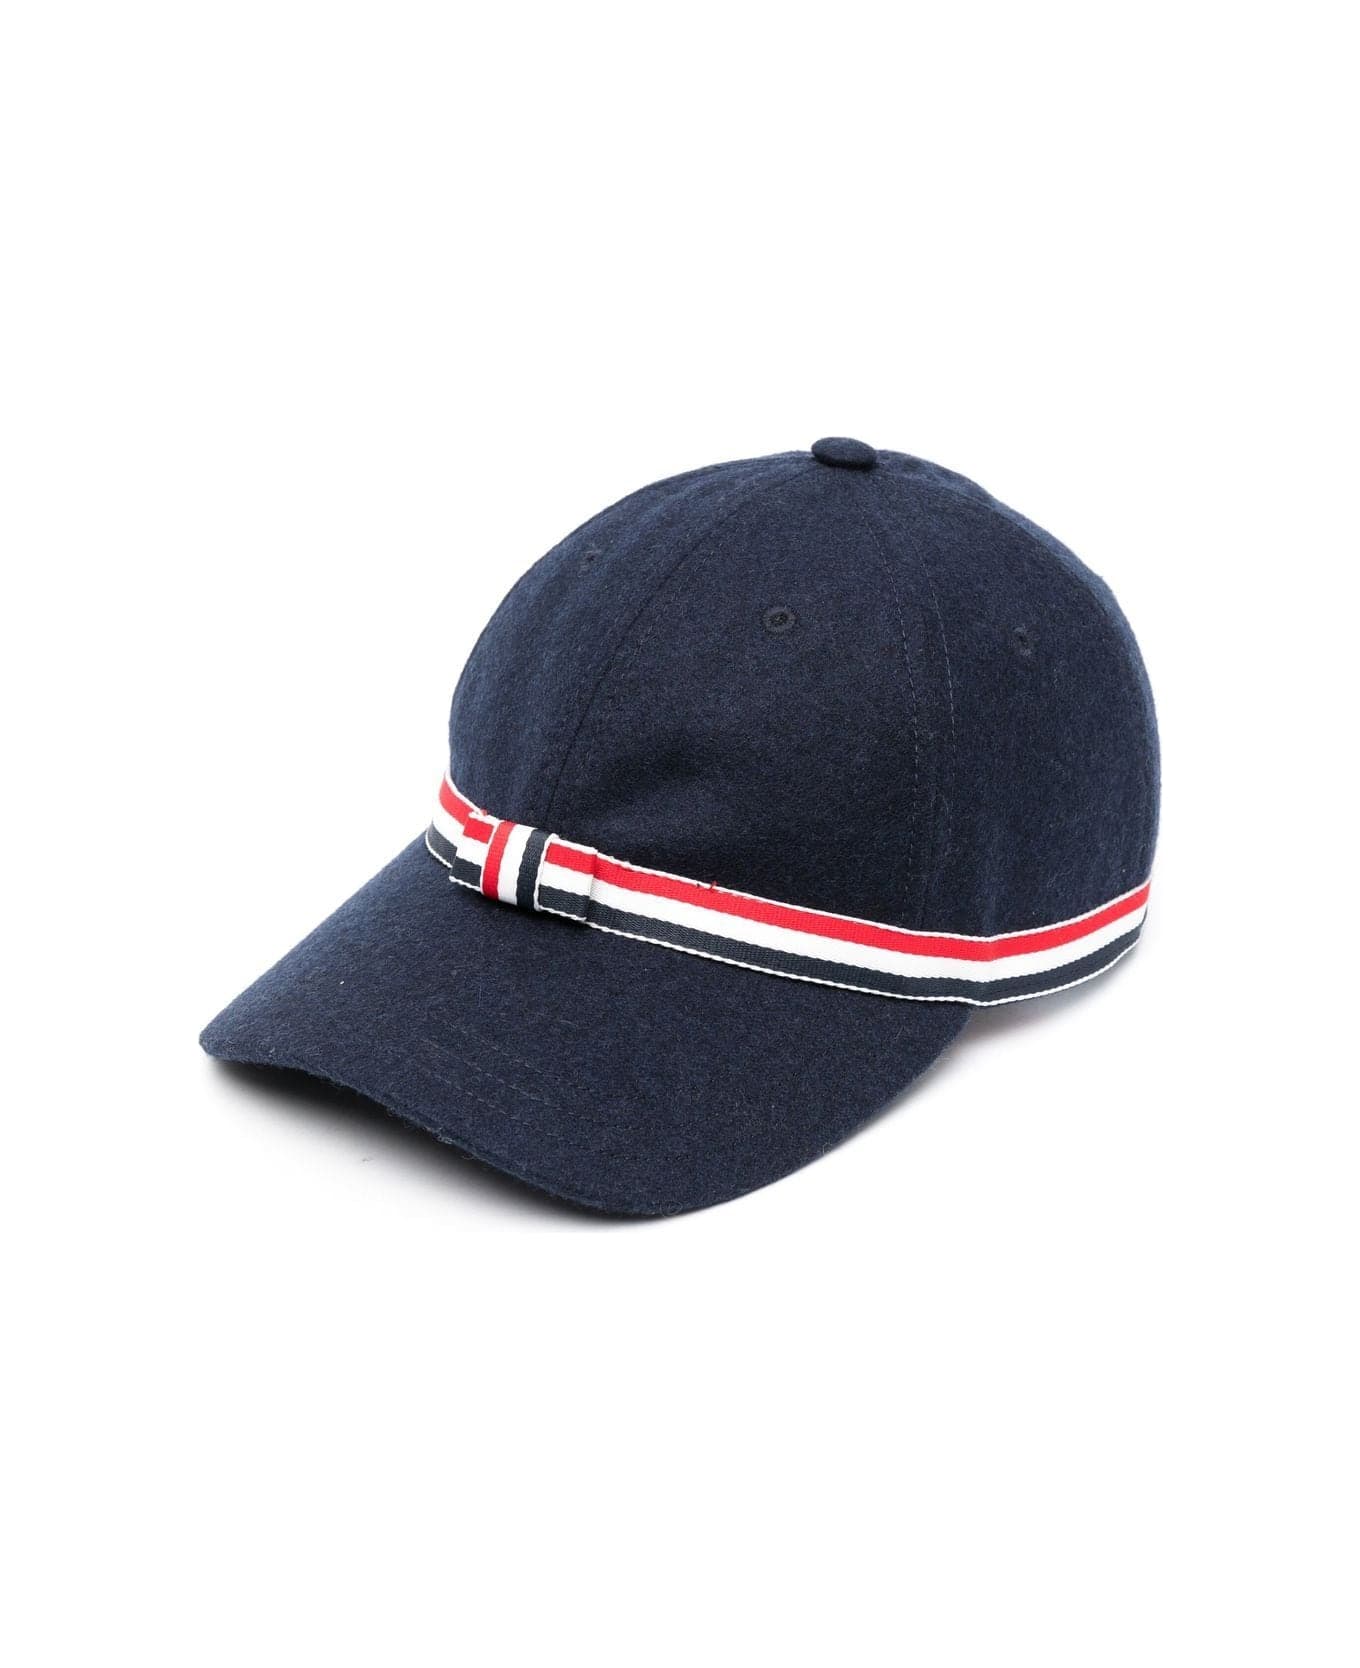 Thom Browne Gg Bow Baseball Cap In Wool Flannel - Navy